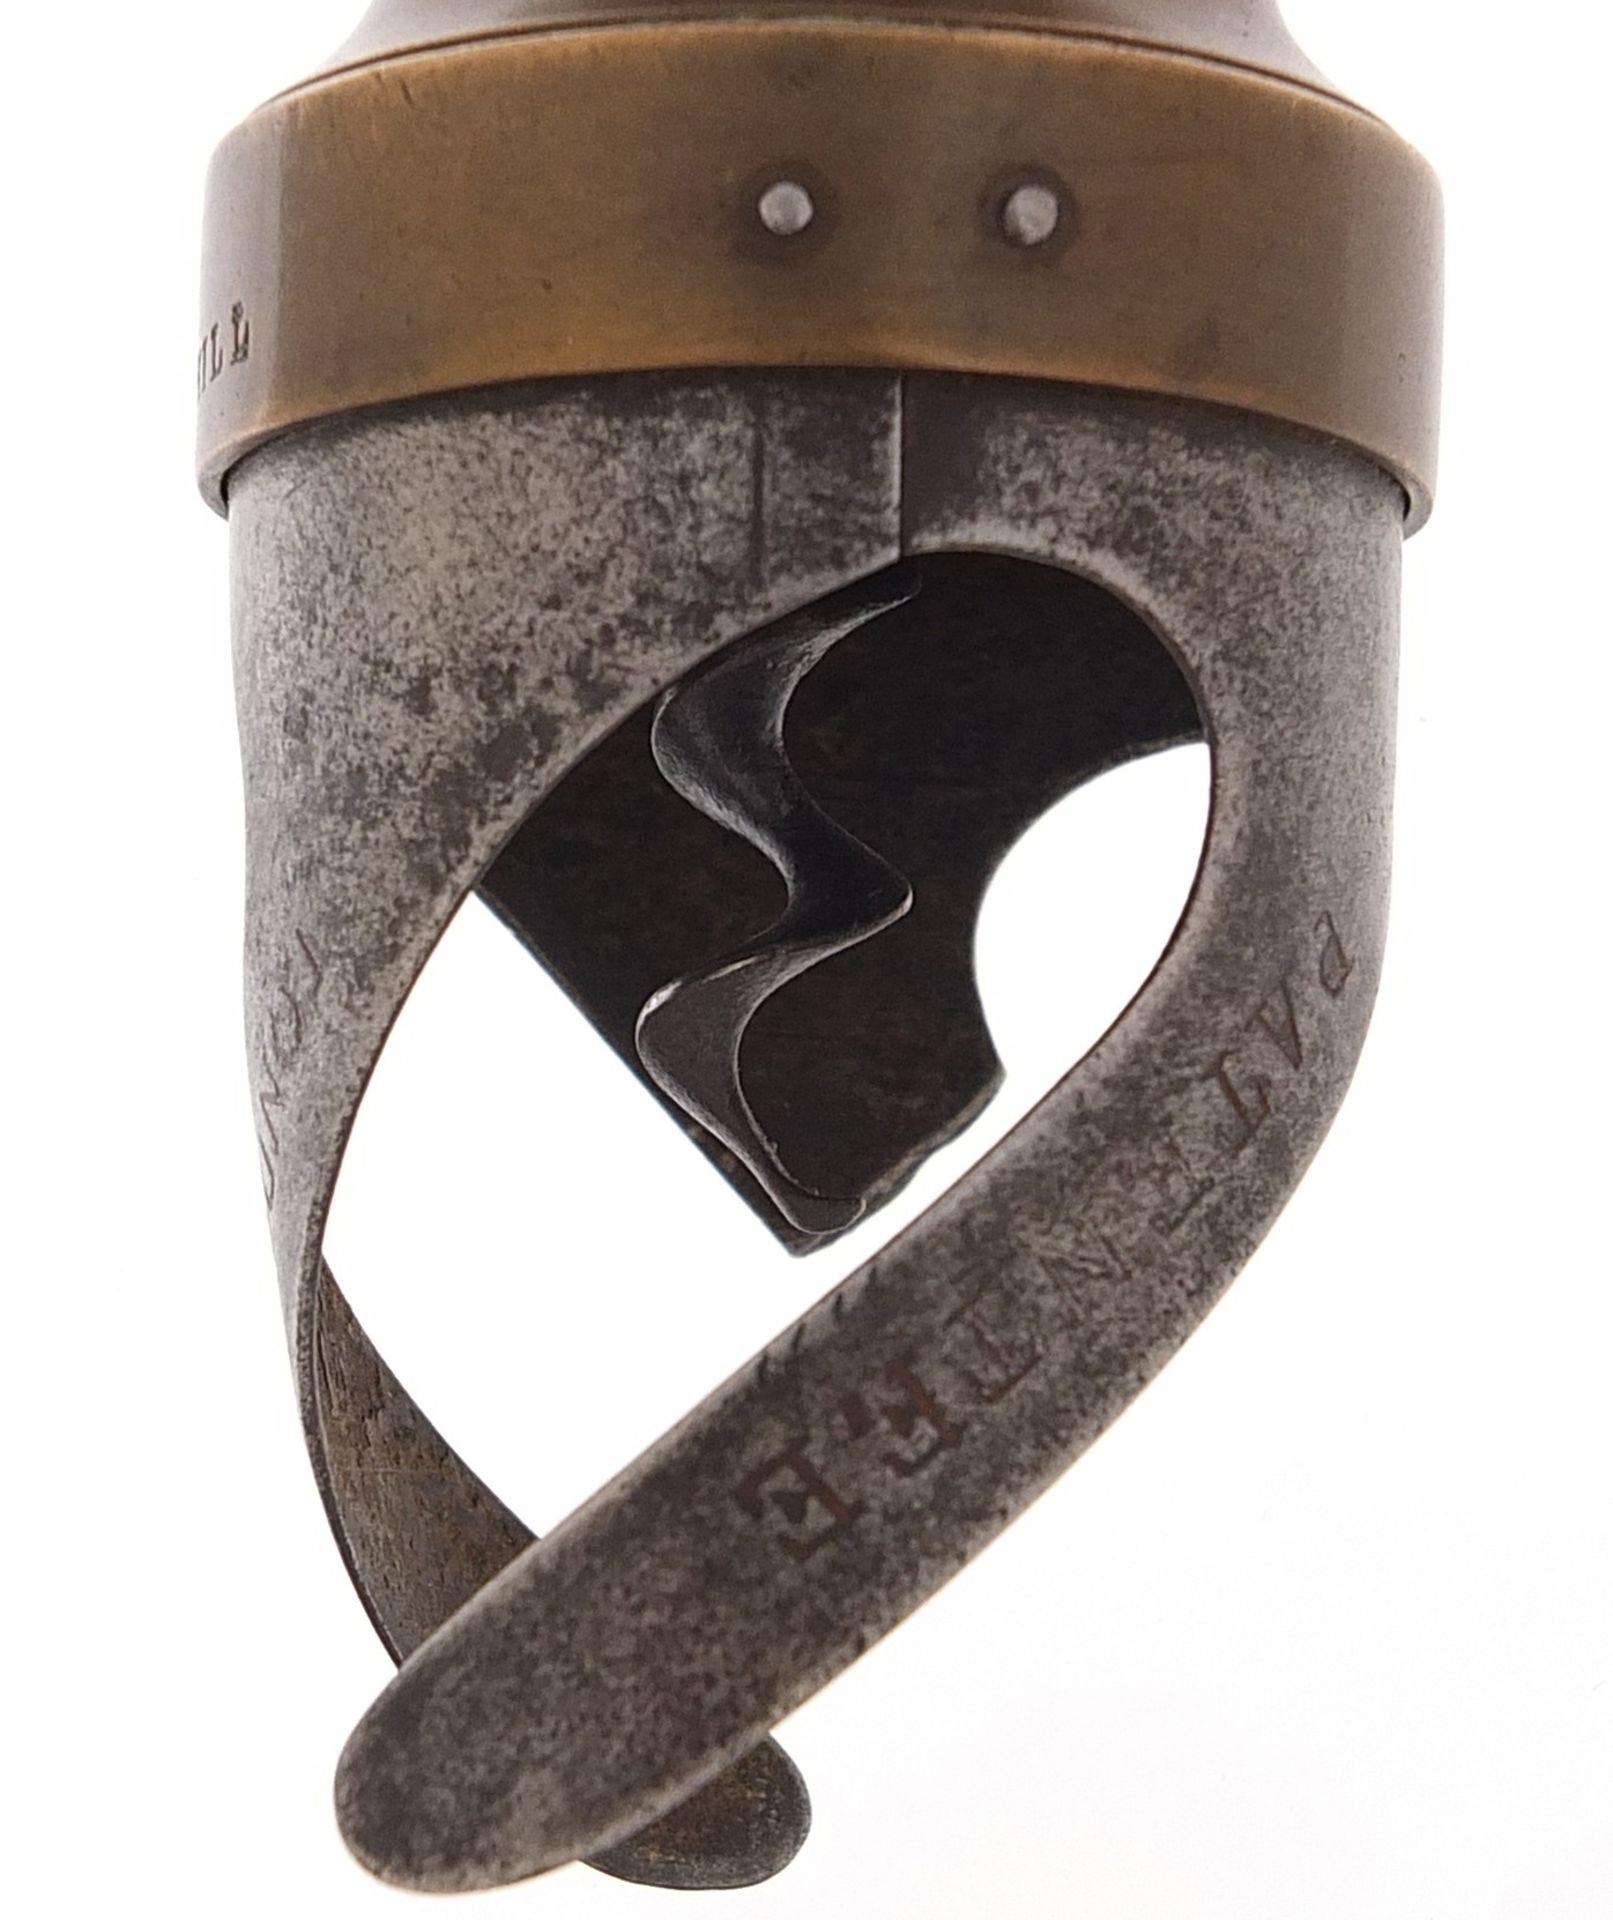 Victorian mechanical corkscrew with side brush impressed Lund Cornhill, 19cm high - Image 6 of 7